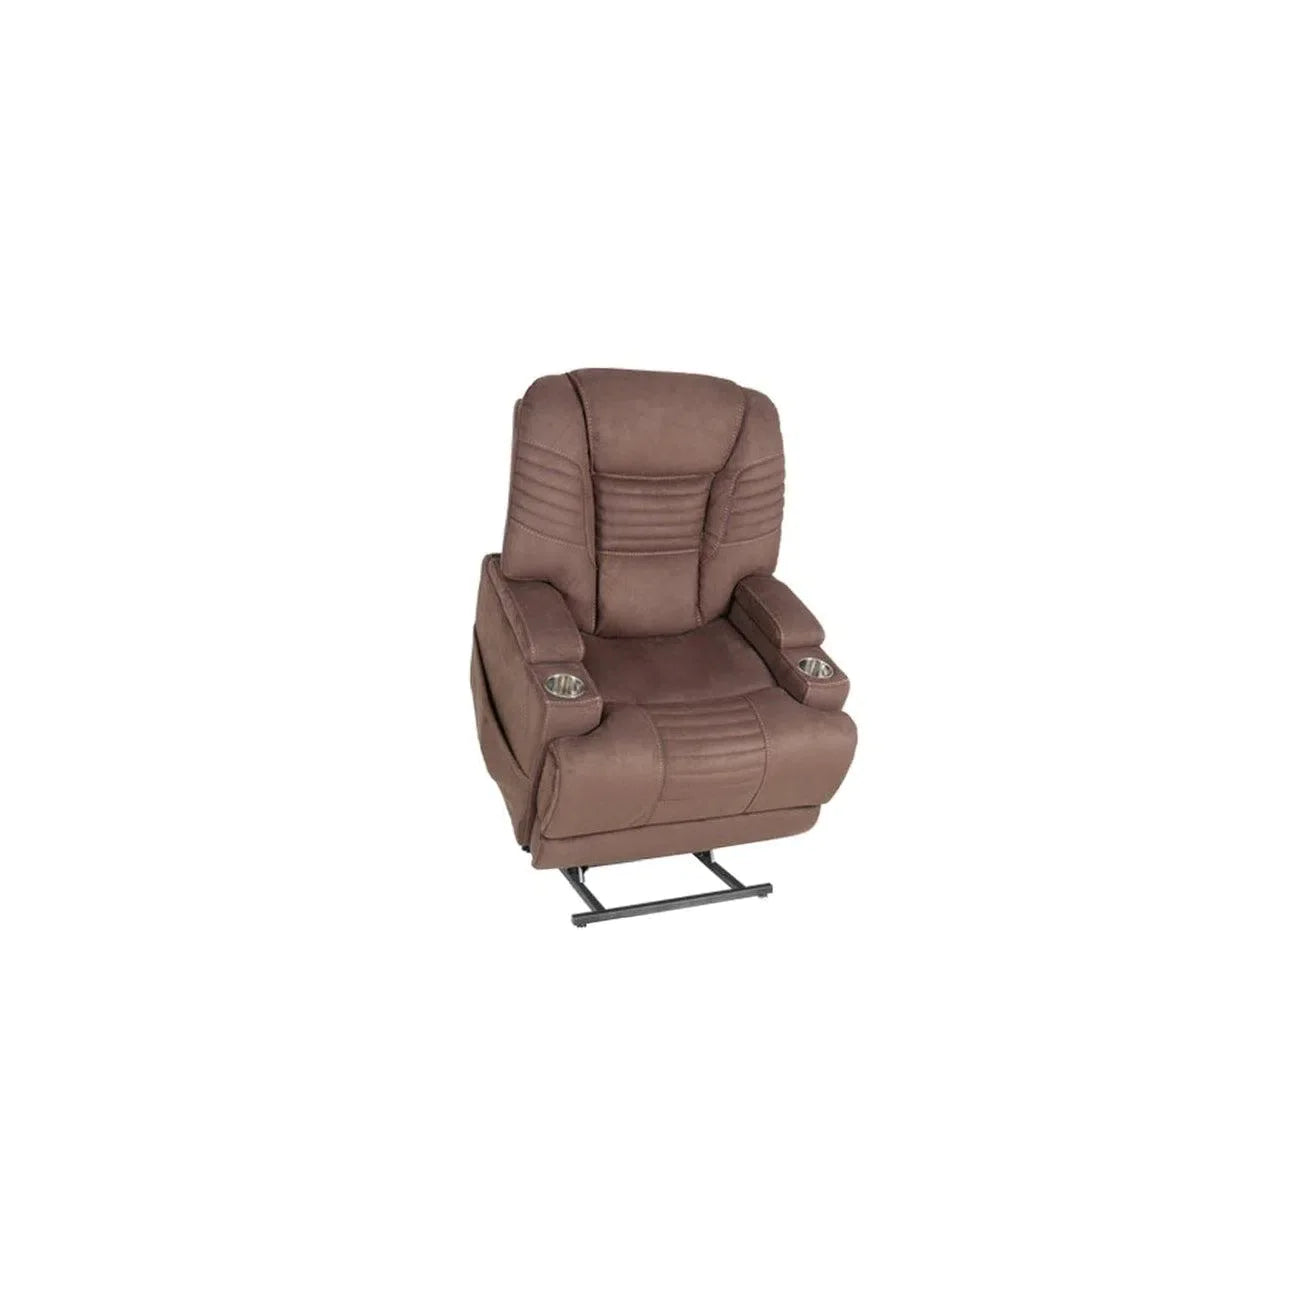 Marcos Dual Motor 158kg Lift Chair with Headrest and Lumbar Adjust-Sleep Doctor